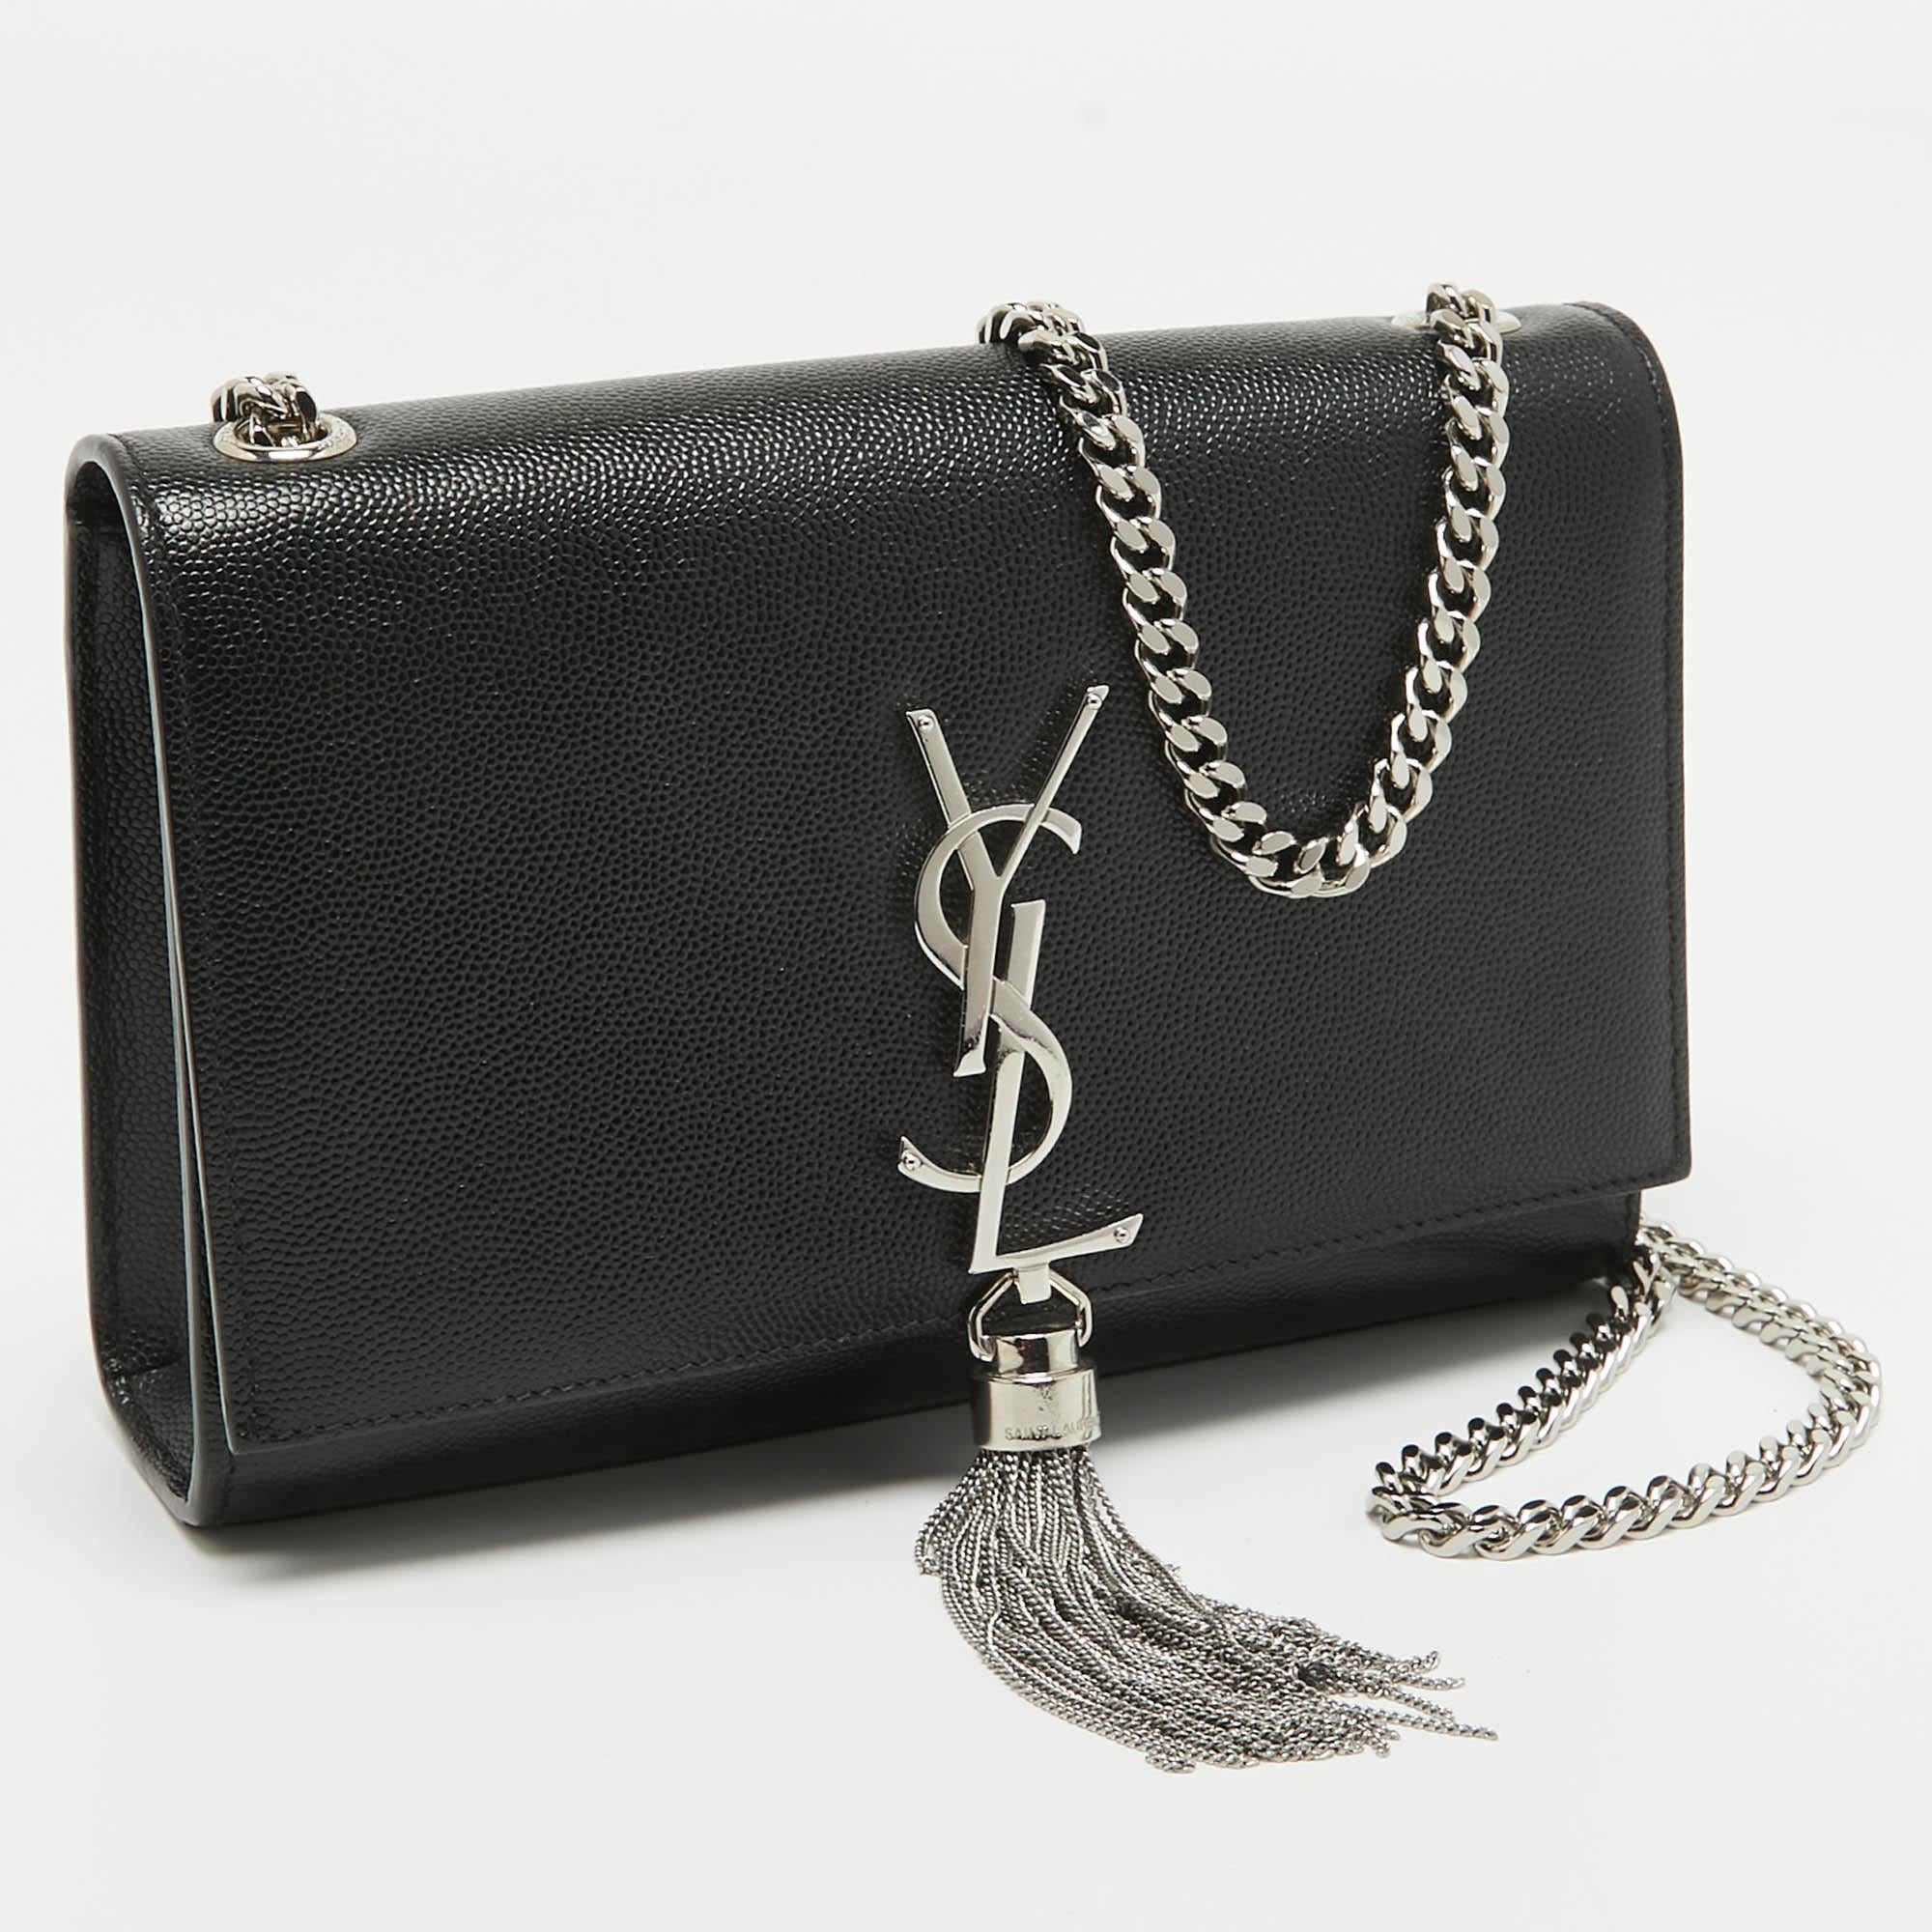 Get the assurance of quality and style that never fades with this Saint Laurent Wallet On Chain. It is sewn using leather and the interior has space for your phone and cardholder. The YSL WOC is complete with a shoulder chain.

